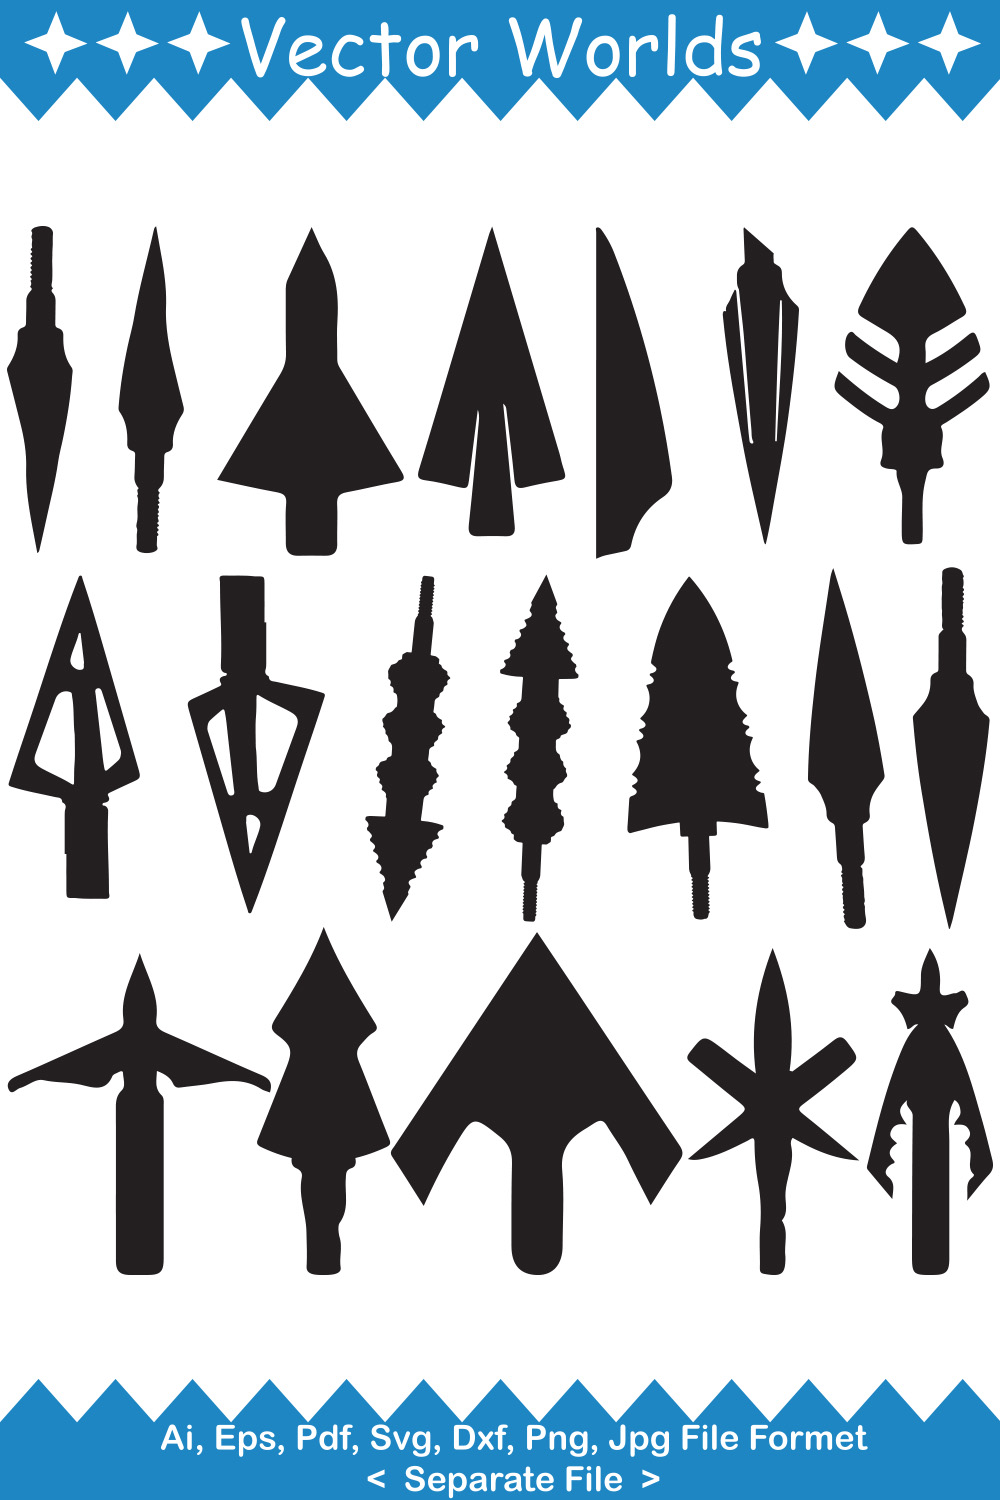 Set of adorable images of broadhead arrows silhouettes.